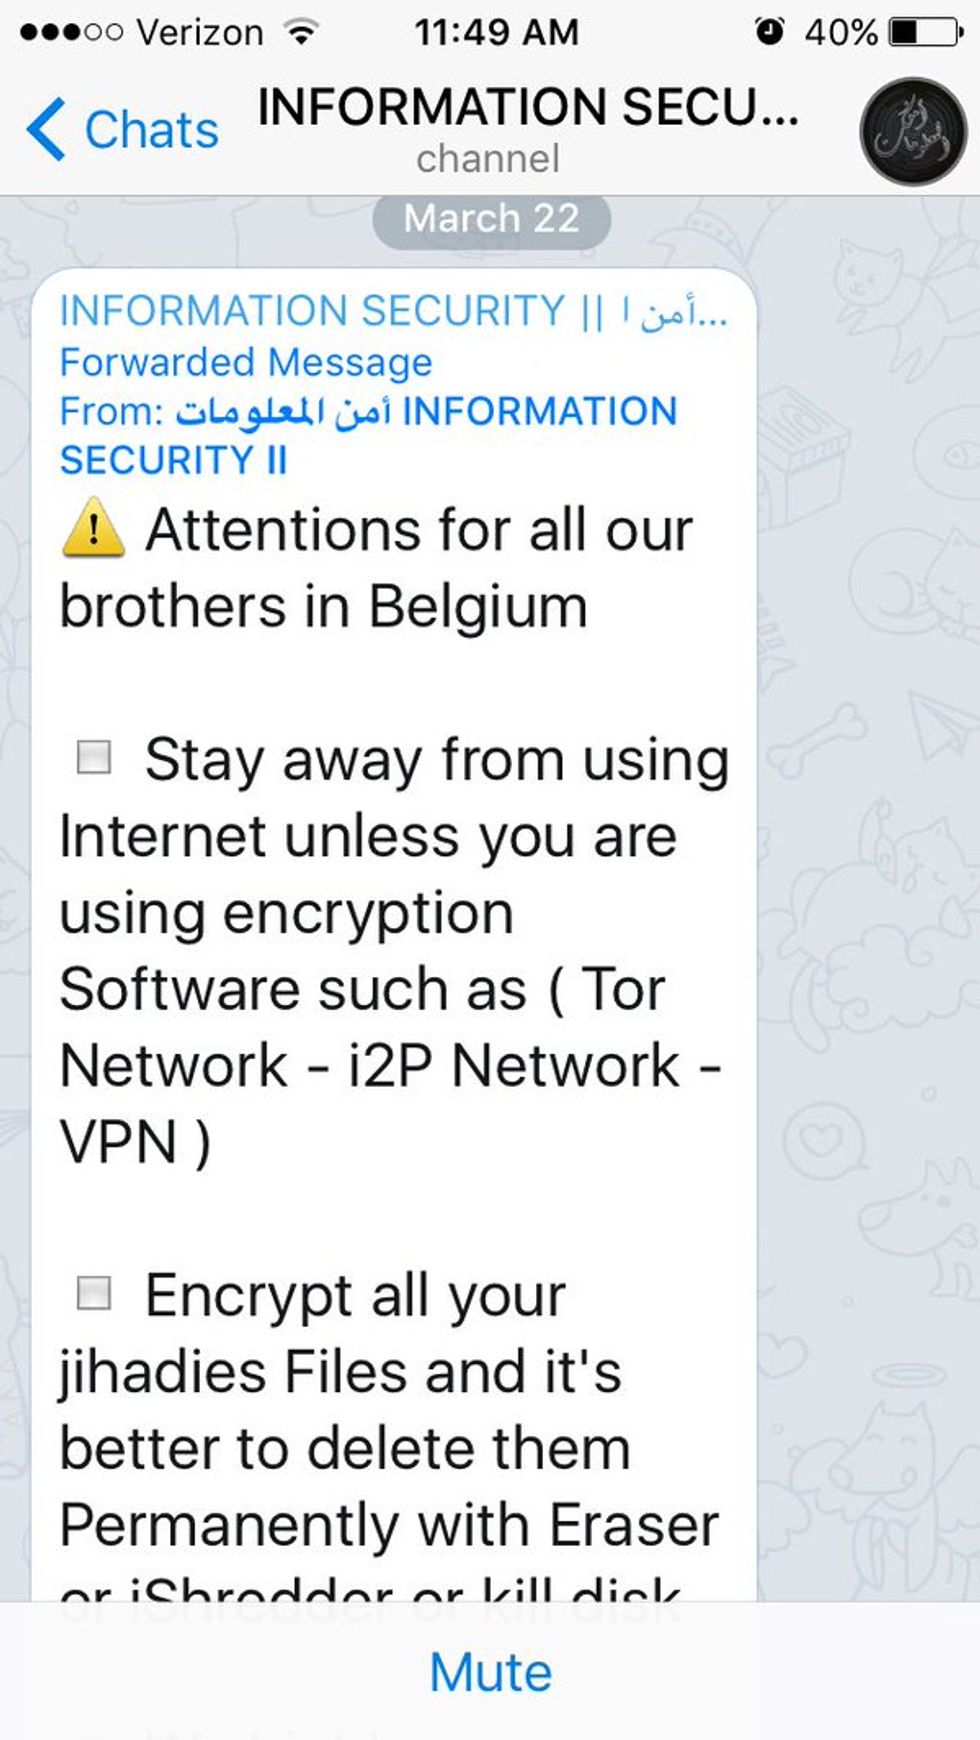 Islamic State 'Tech Team' Issued Advice to 'Brothers' in Belgium in the Wake of Brussels Attacks